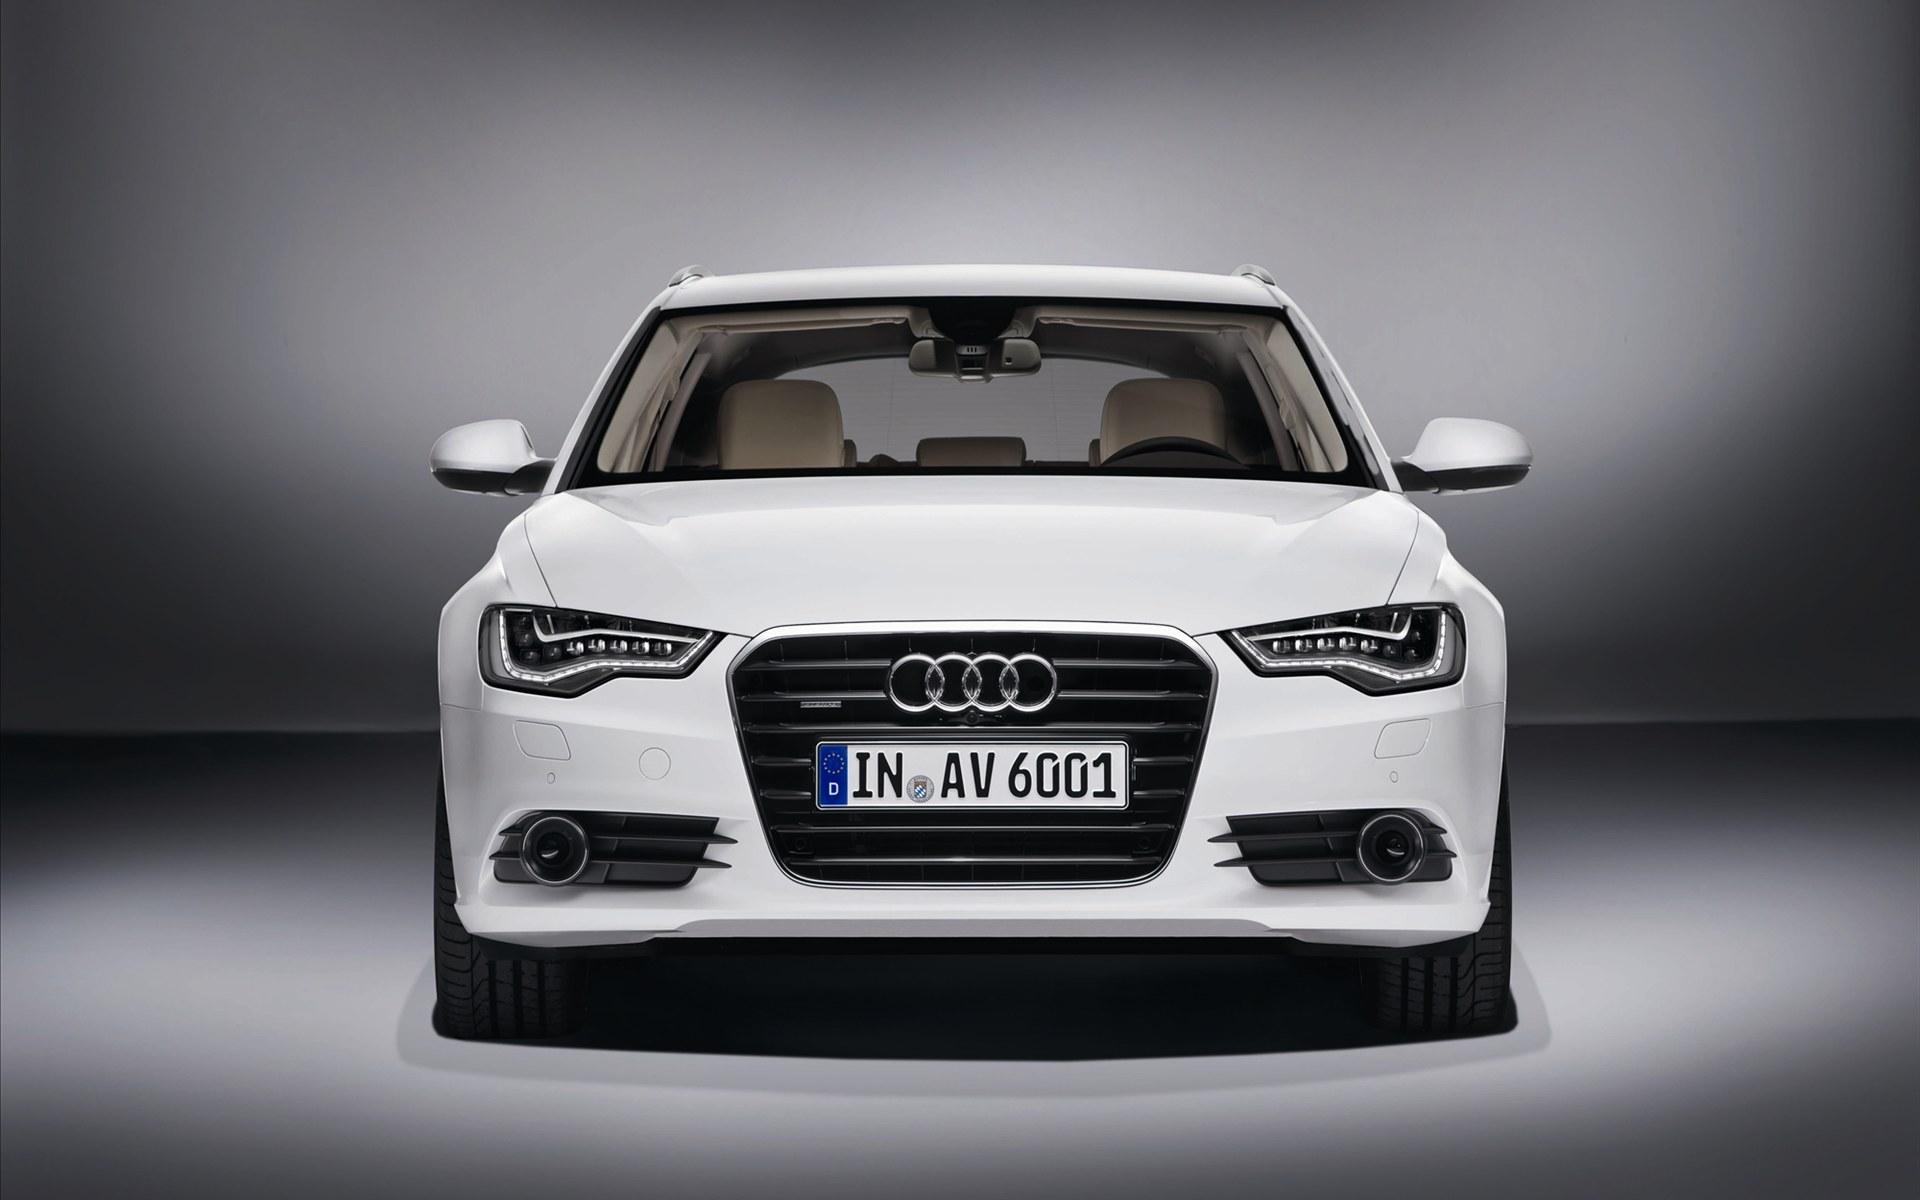 Magnificent Audi A6 Wallpaper Full HD Pictures